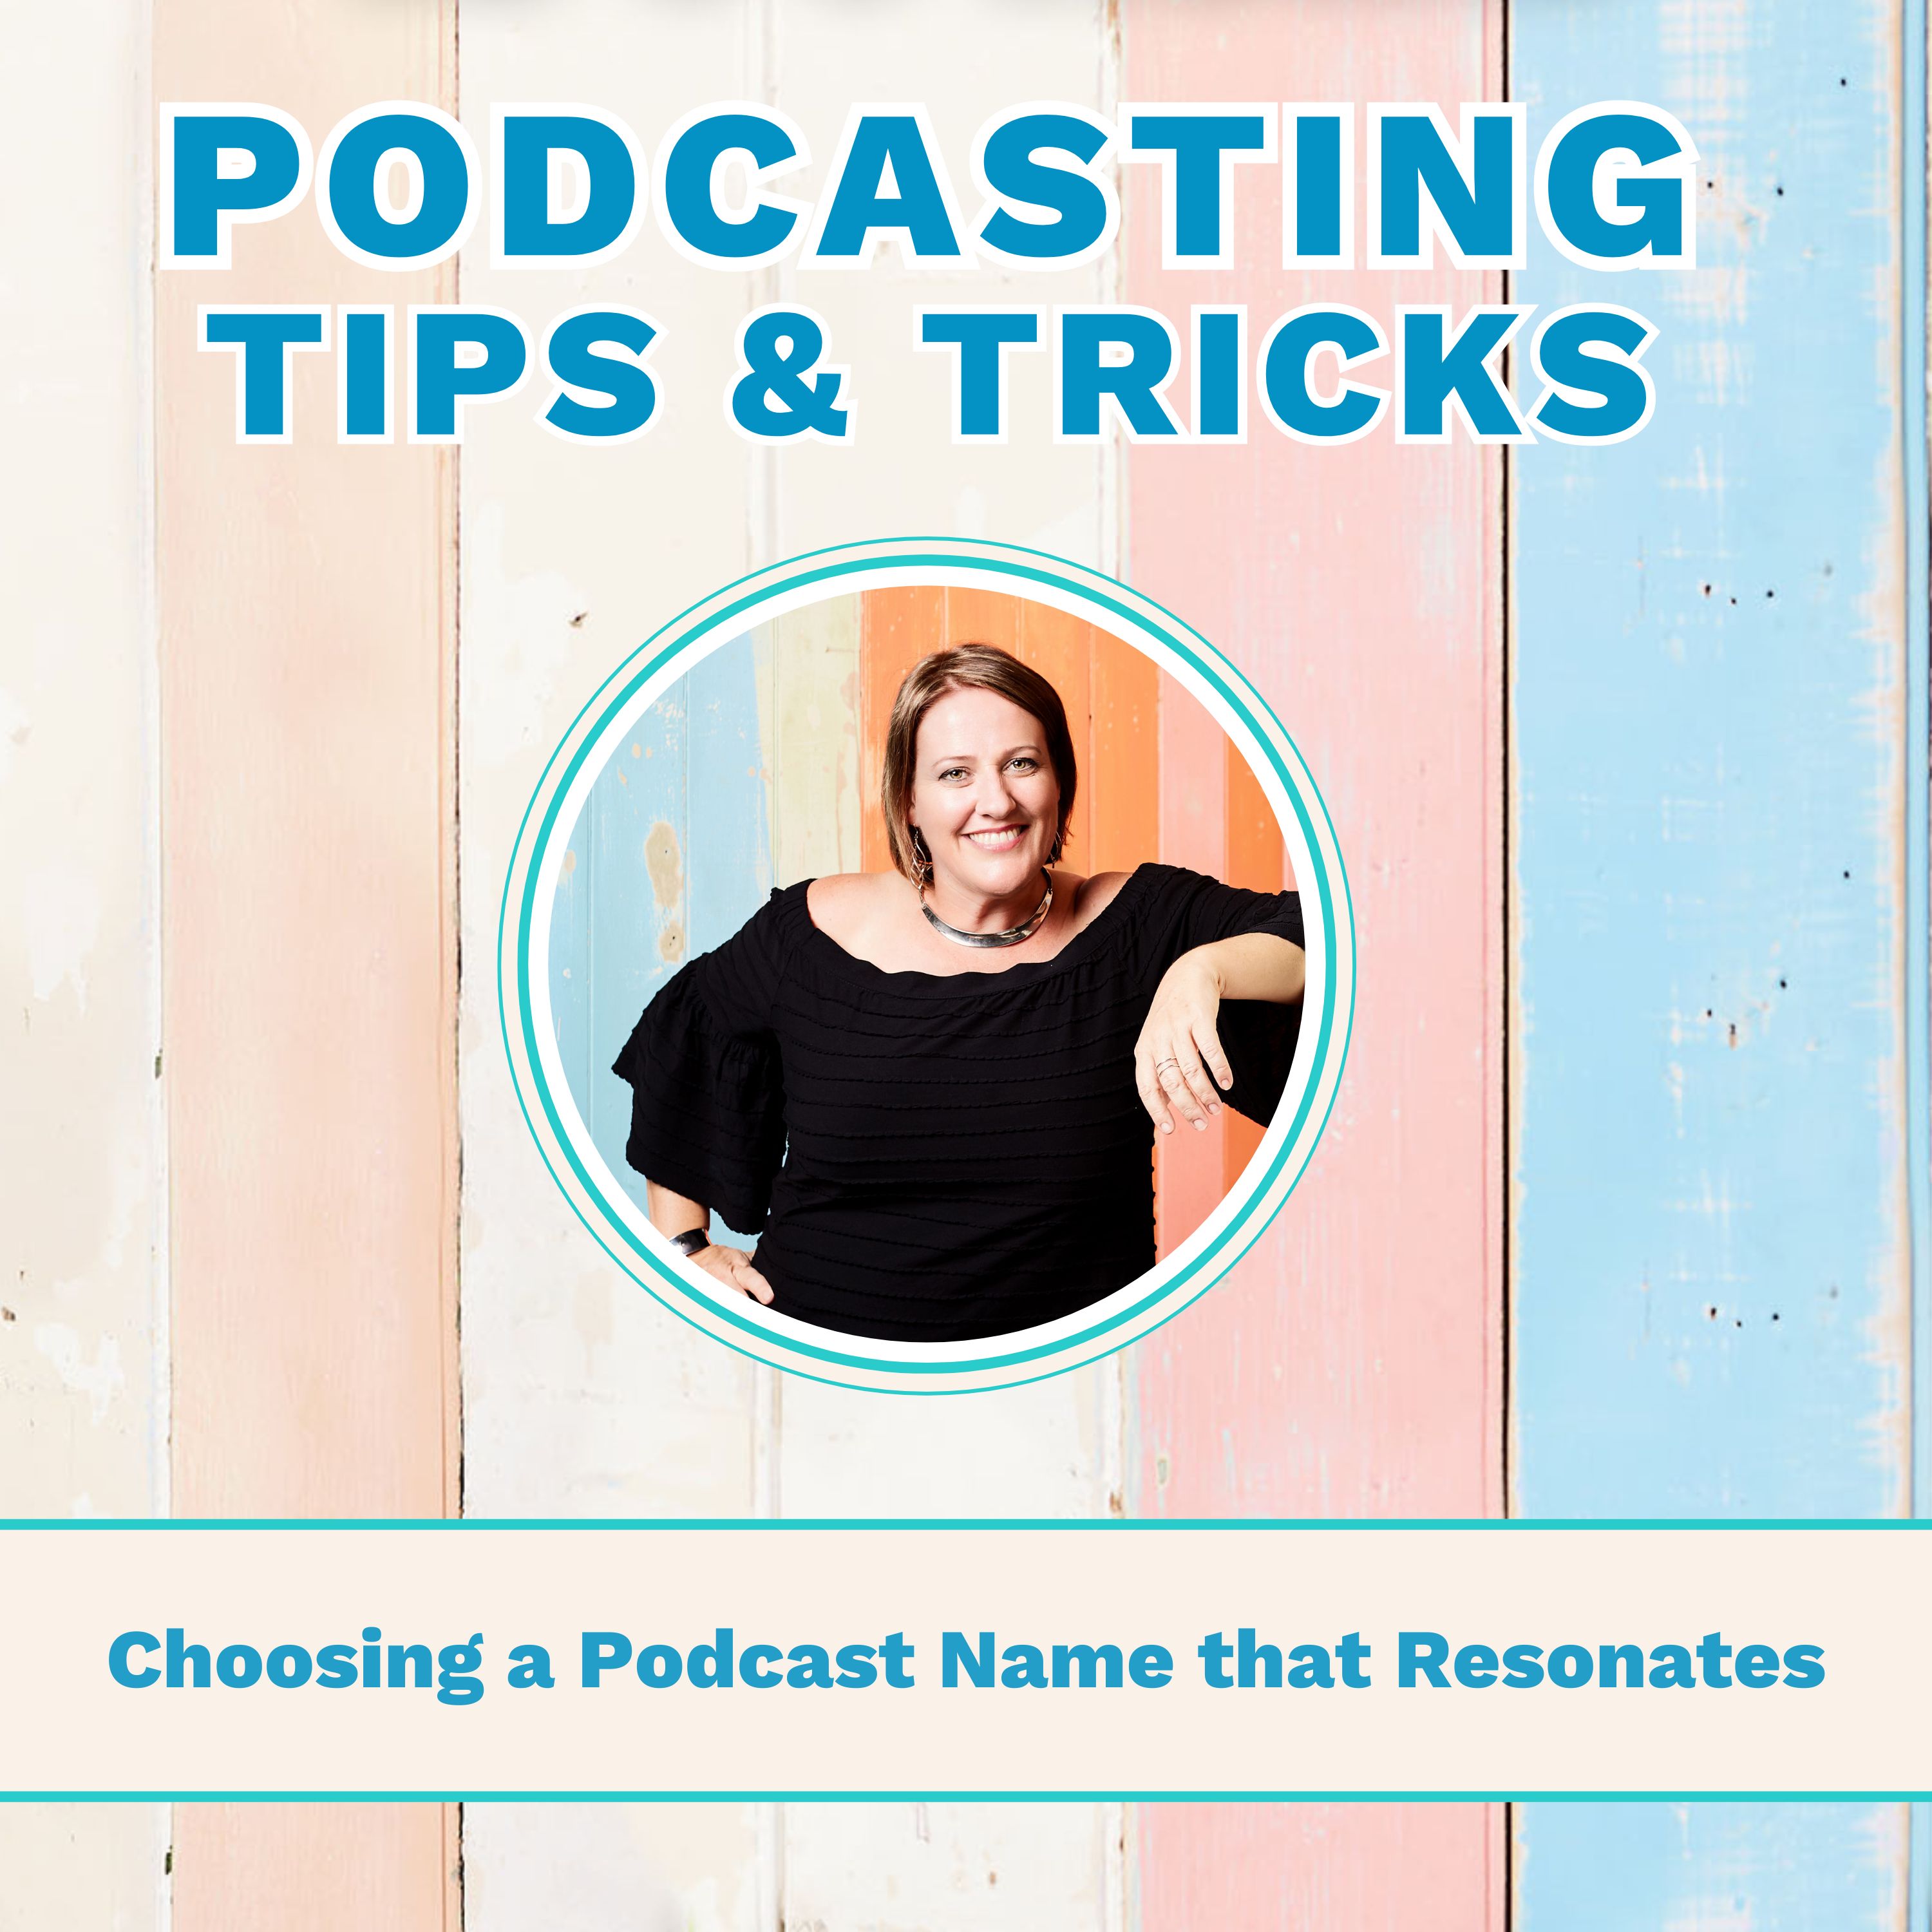 Choosing a Podcast Name that Resonates